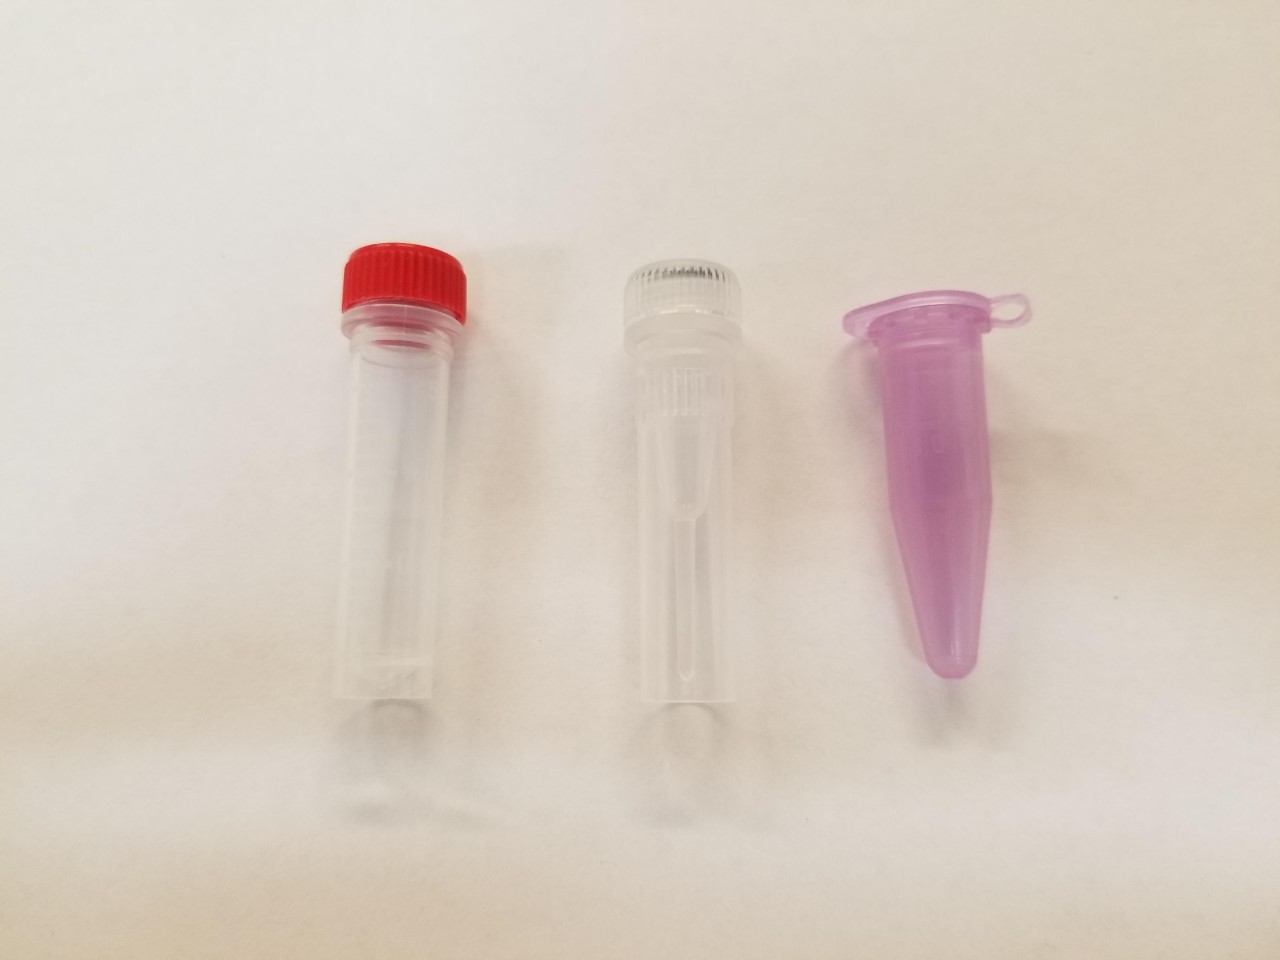 Preferred sample collection tubes